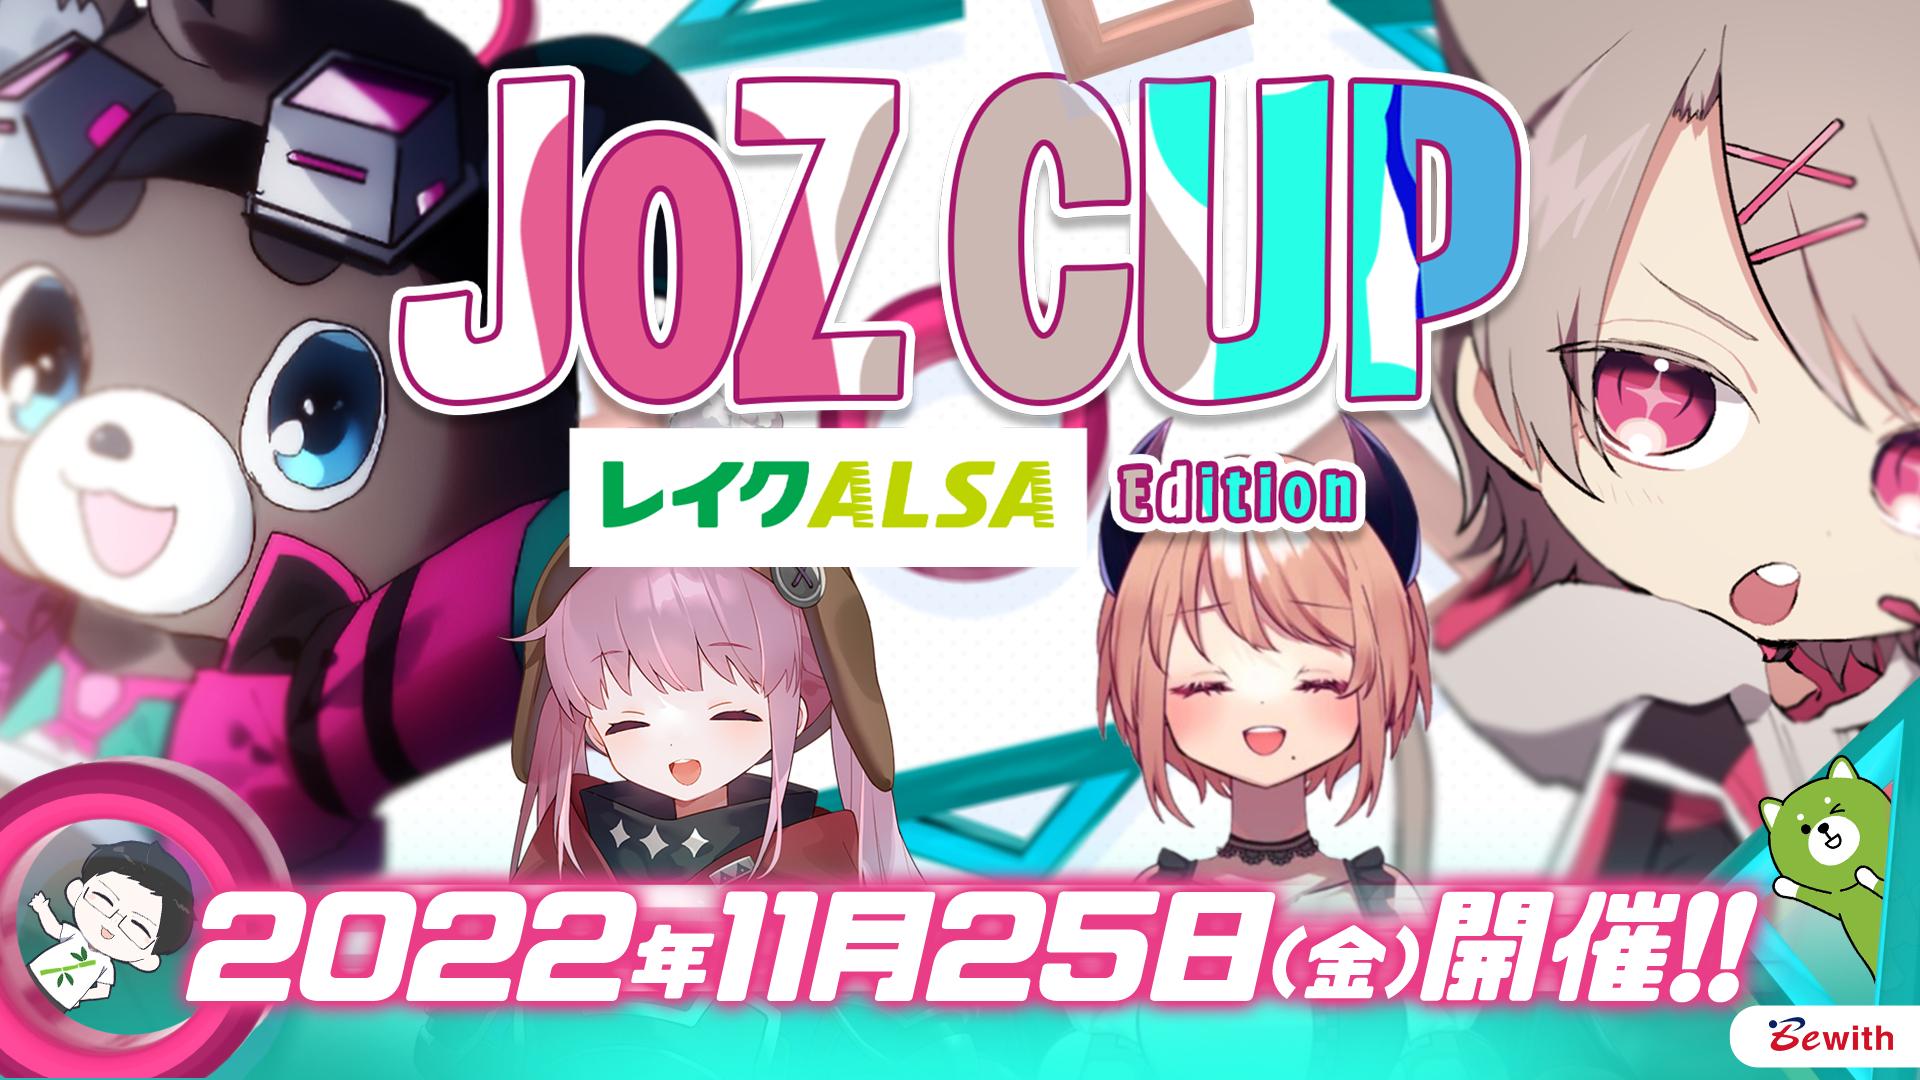 JOZ CUP feature image